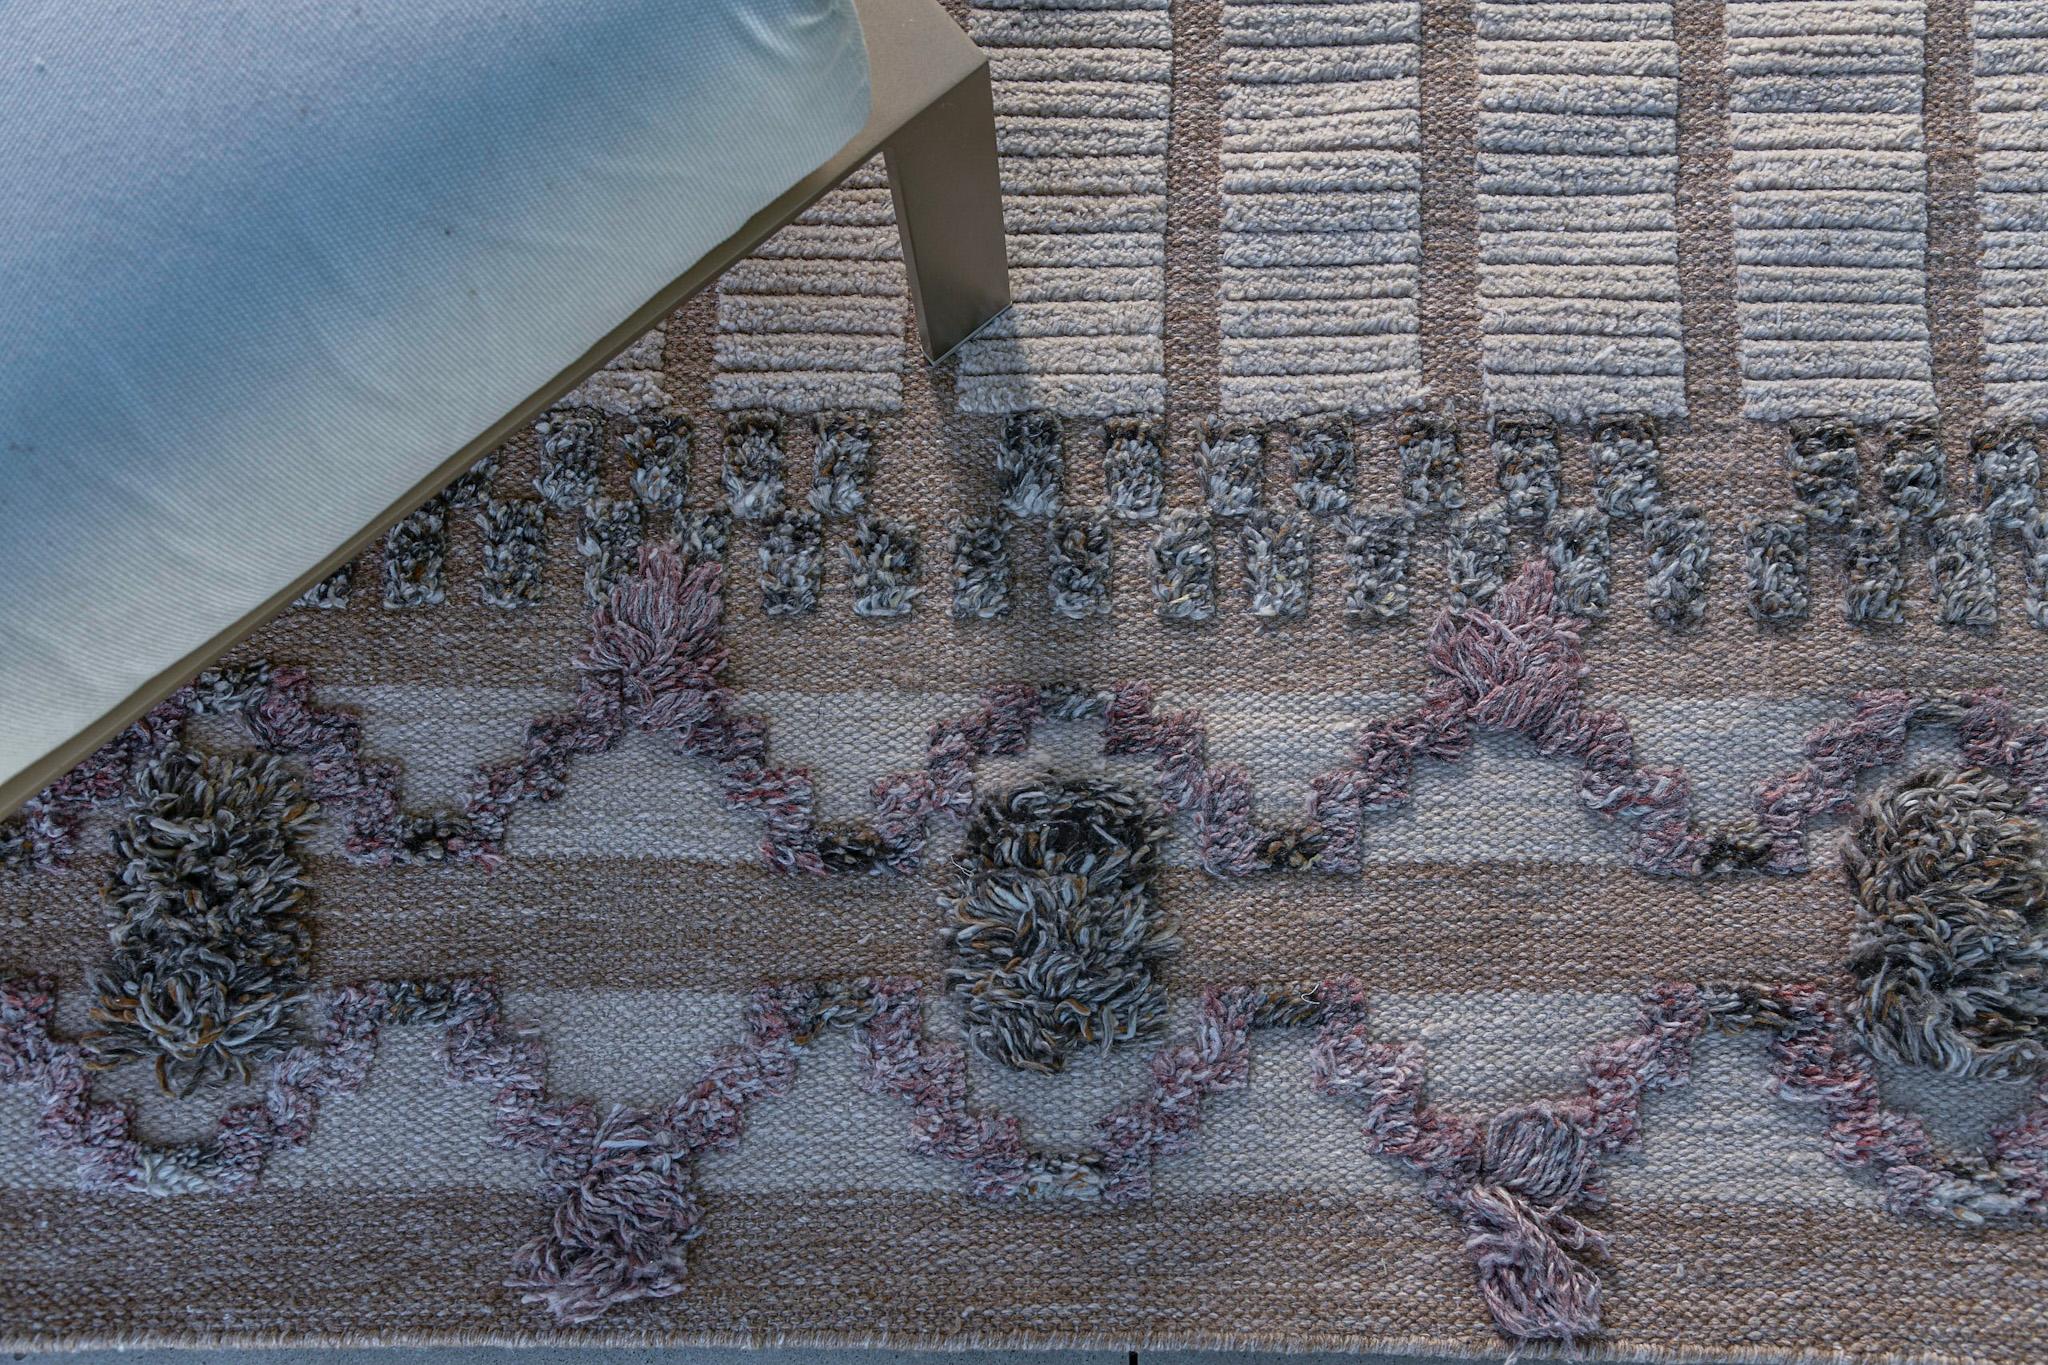 Enjoy the fresh air with Nasim, rugs that work indoors and out.

Rug Number
31425
Size
9' 2